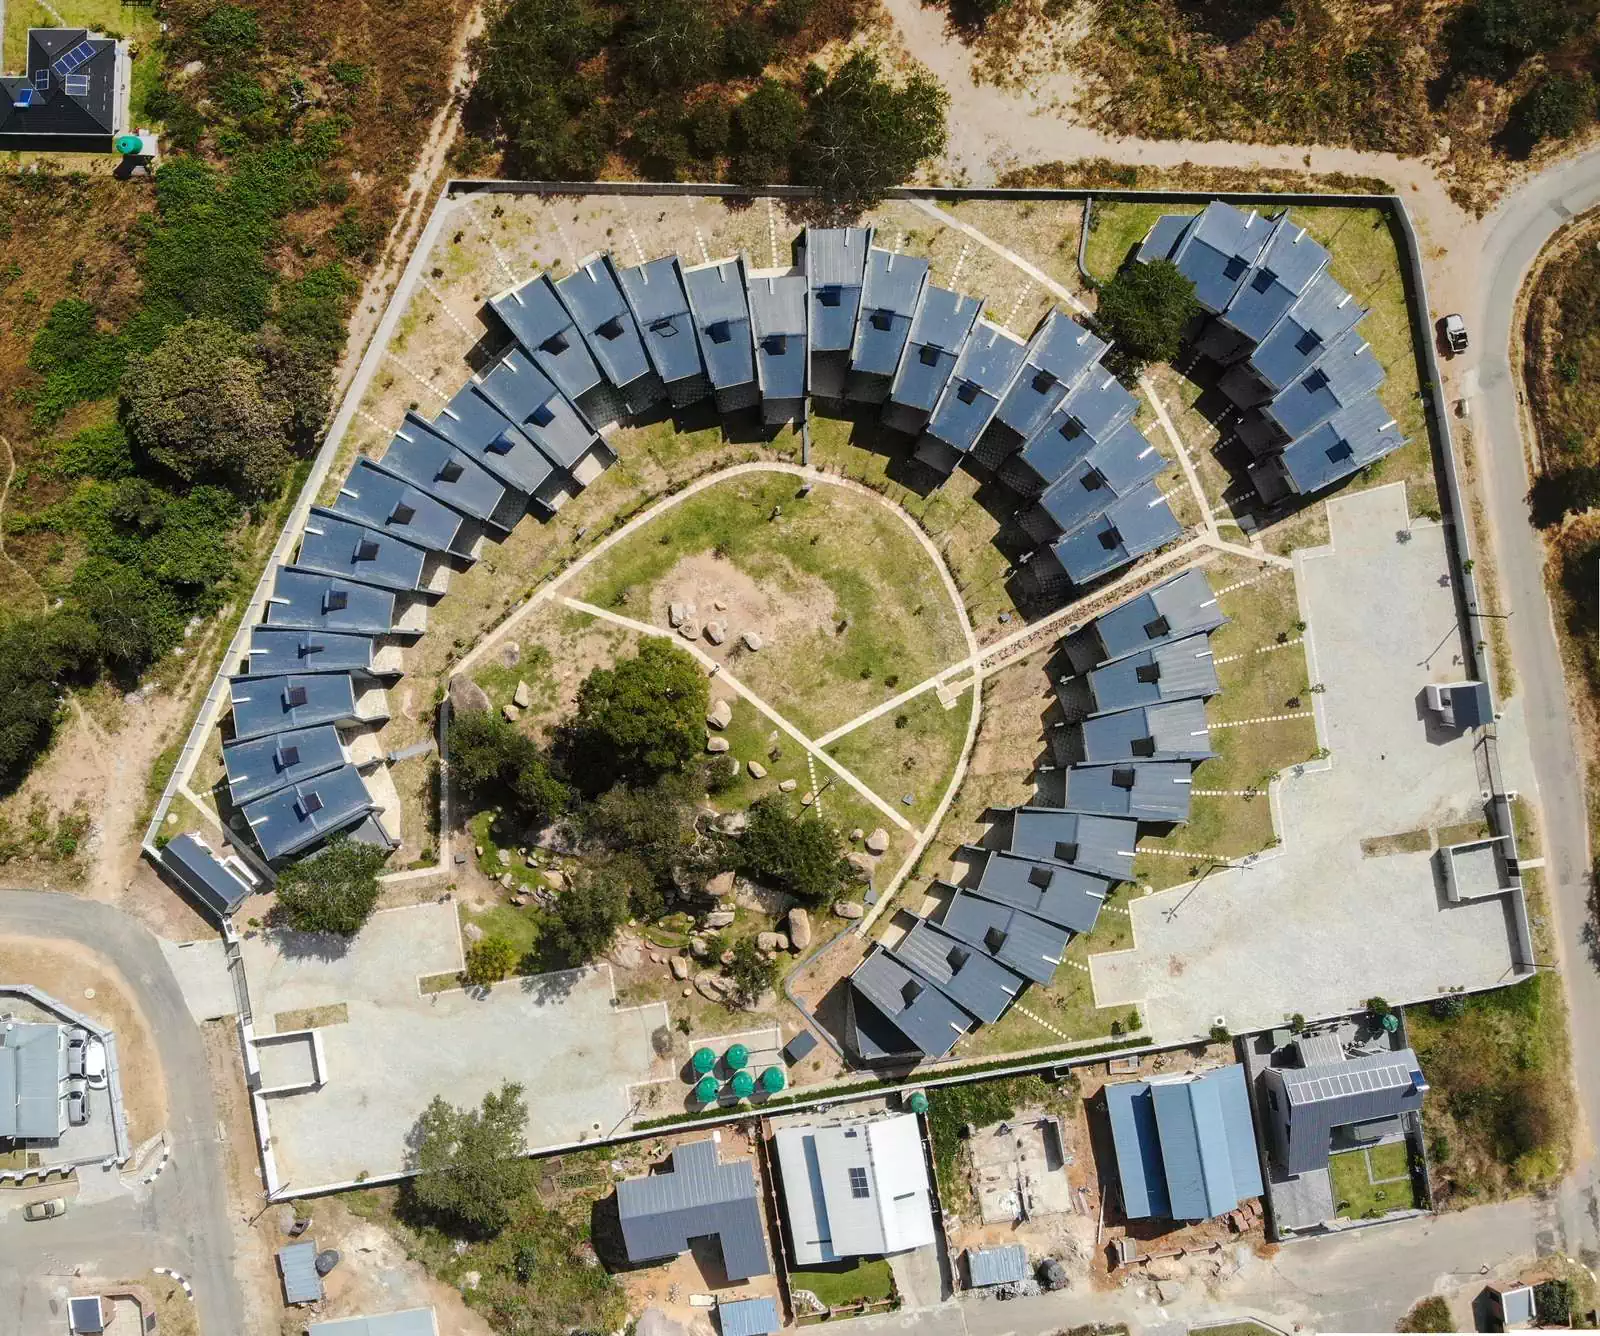 Cluster housing development seen from air by local architect